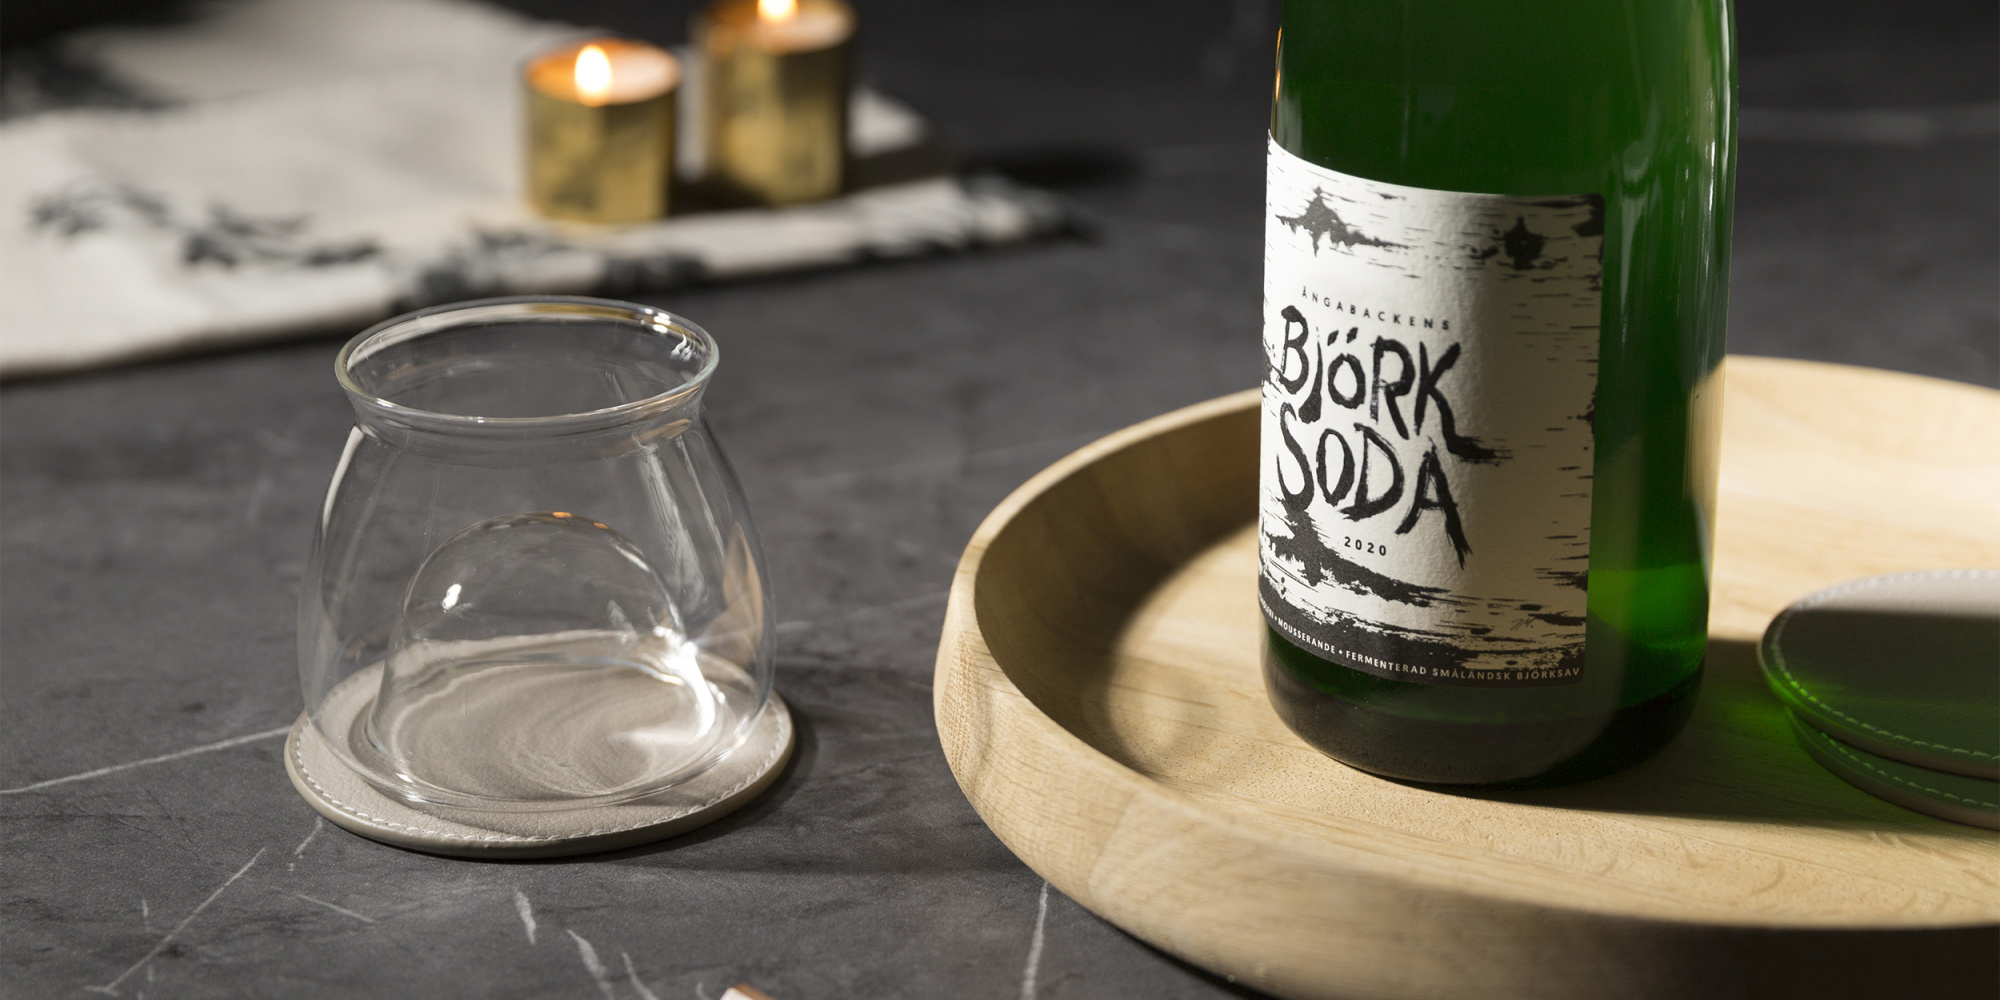 Björksoda with Halo glass by NMASA Design.